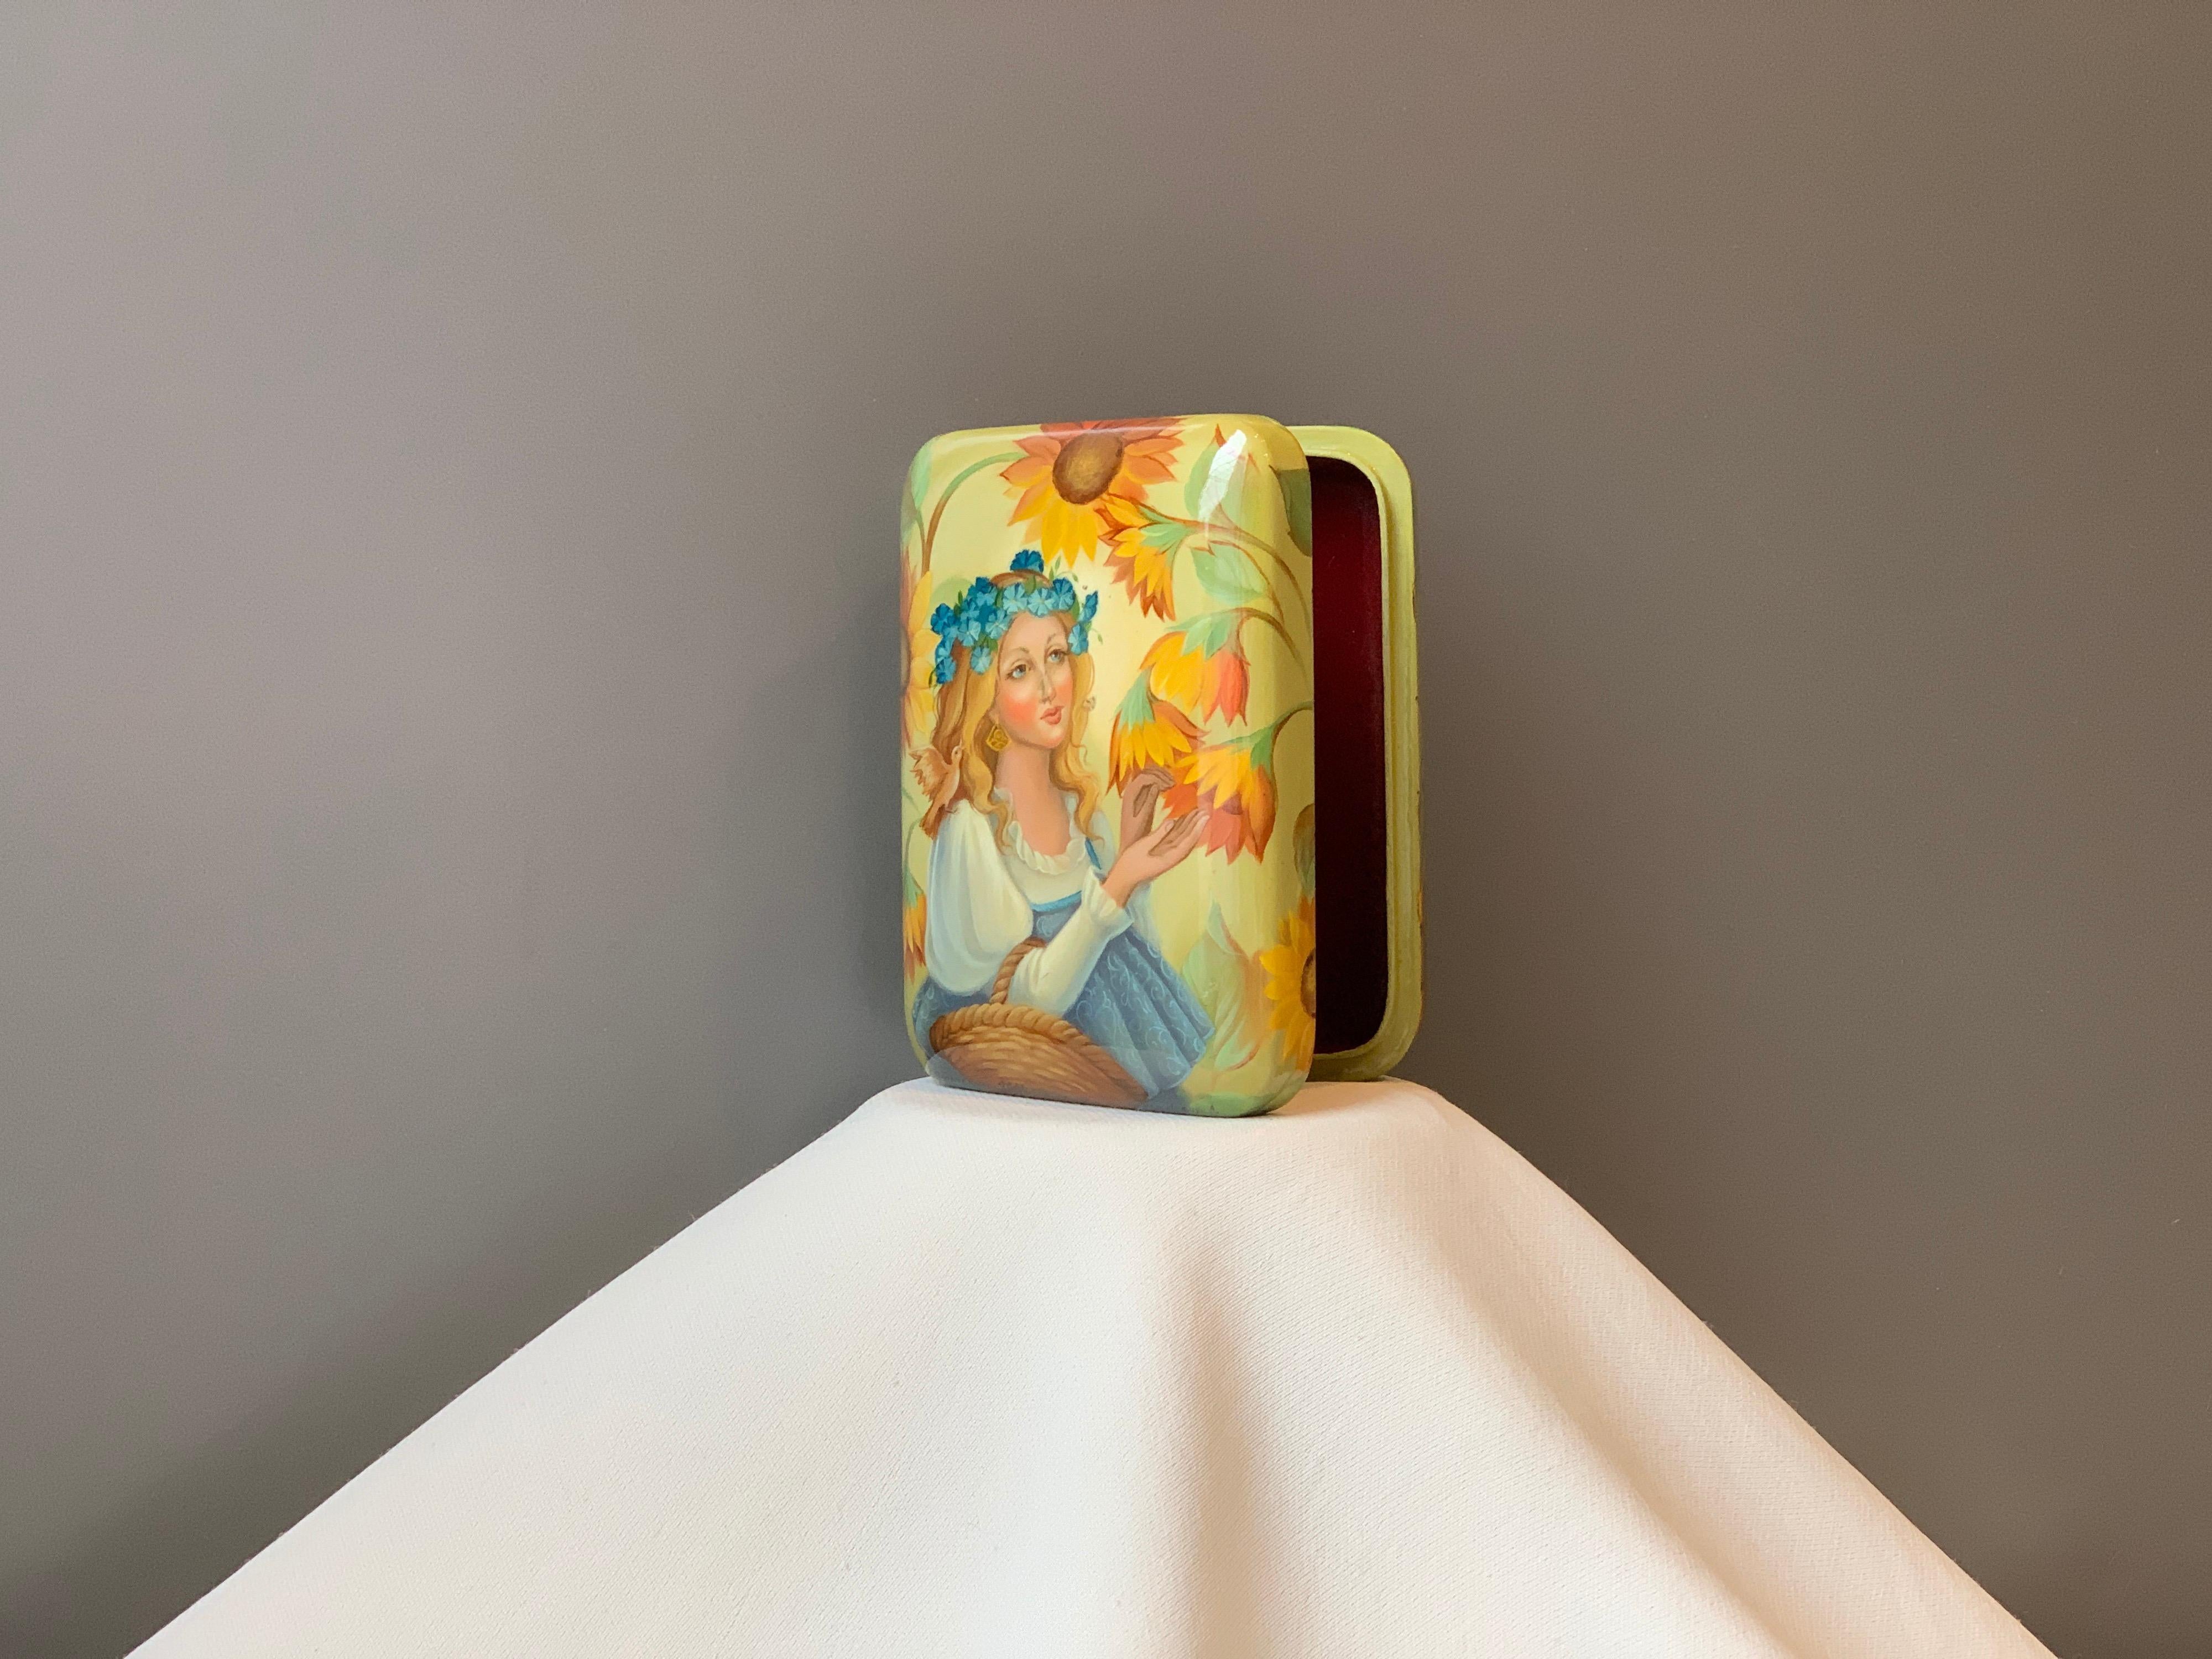 Mid-Century Modern Russian Lacquered Small Decorative Box 'Girl with Sunflowers' by Fedoskino 